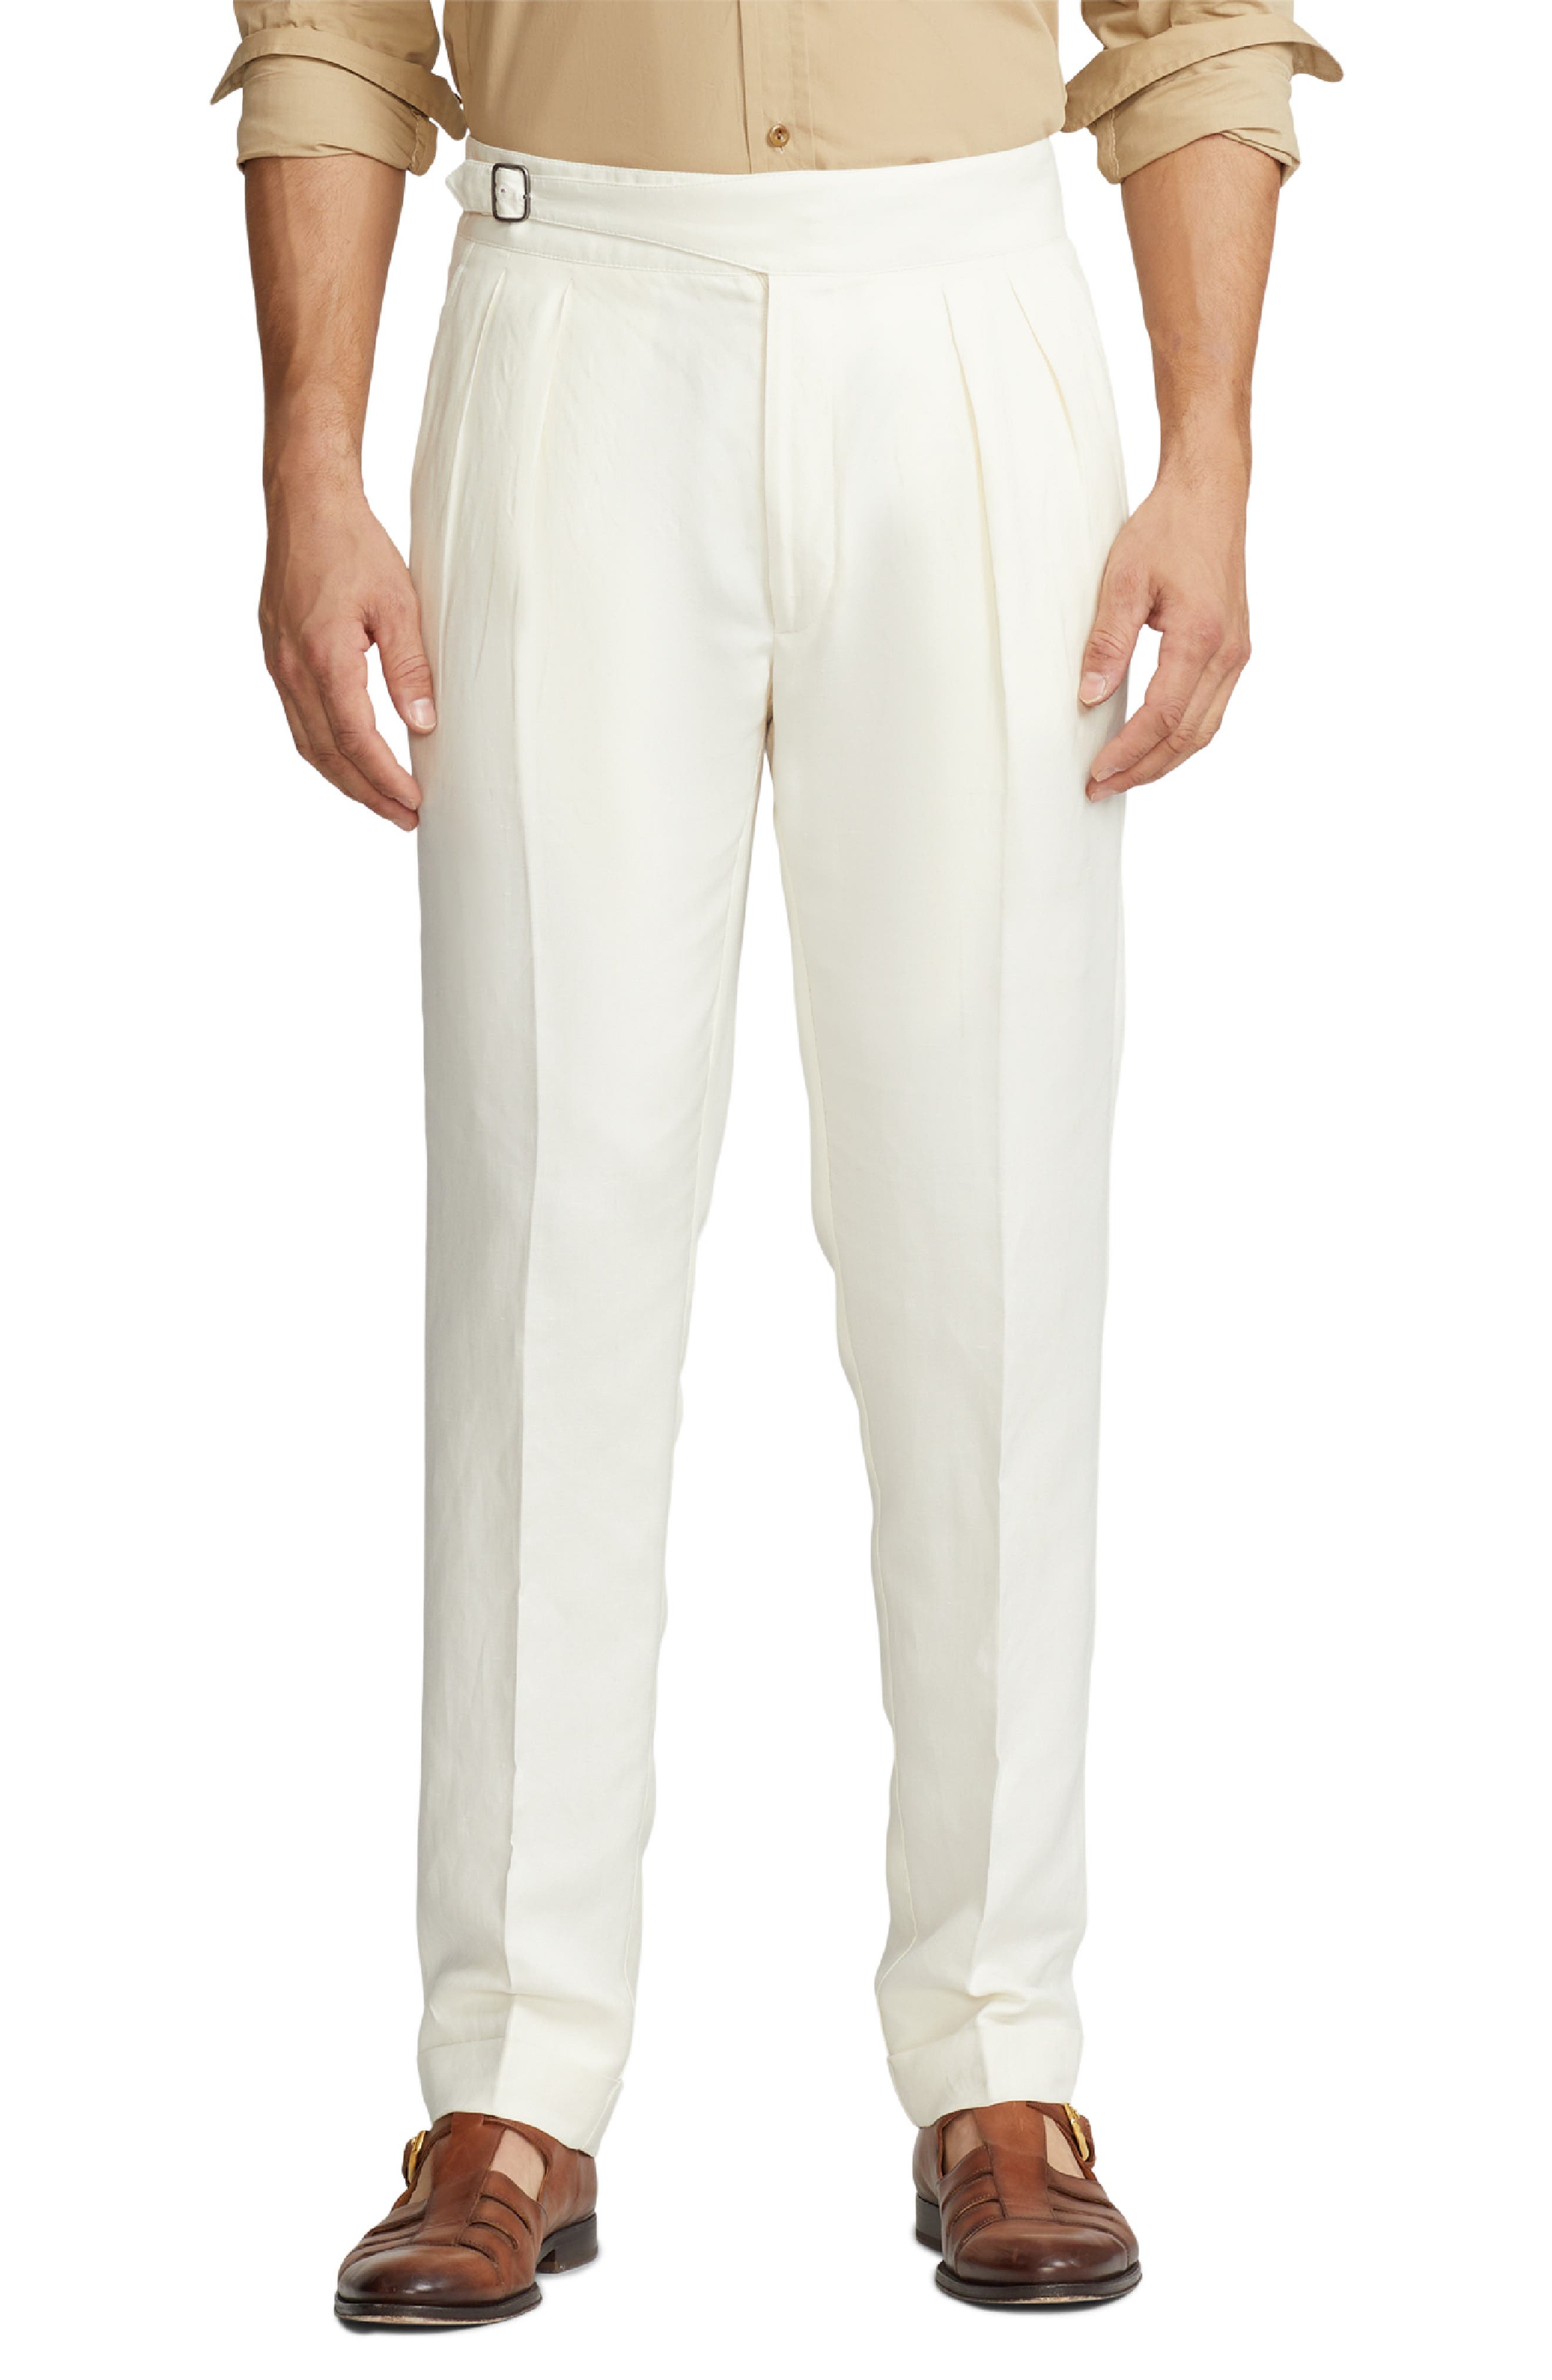 Kenzo Kids limited edition cotton trousers - White